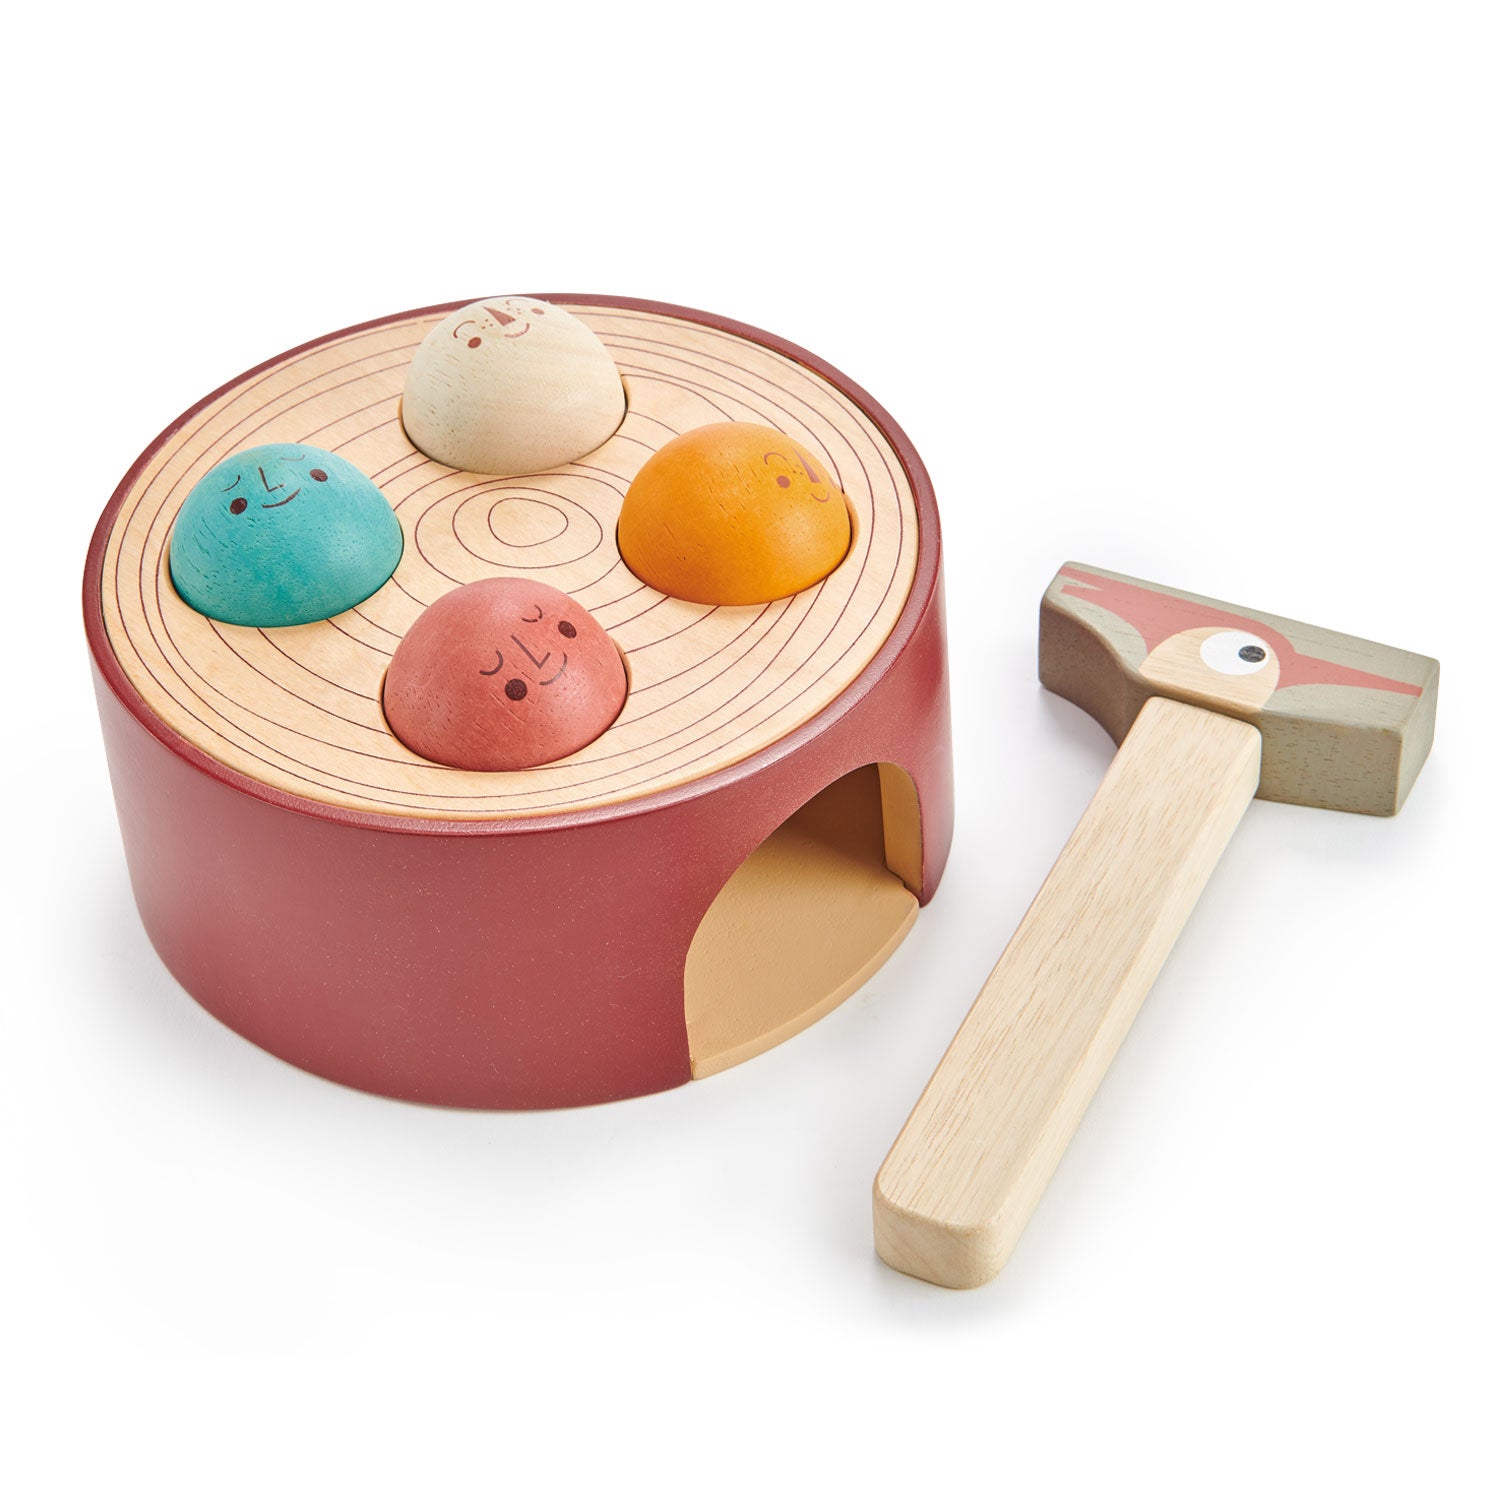 Tender Leaf Toys Mouse-shaped Wooden Cheese Board Play Set